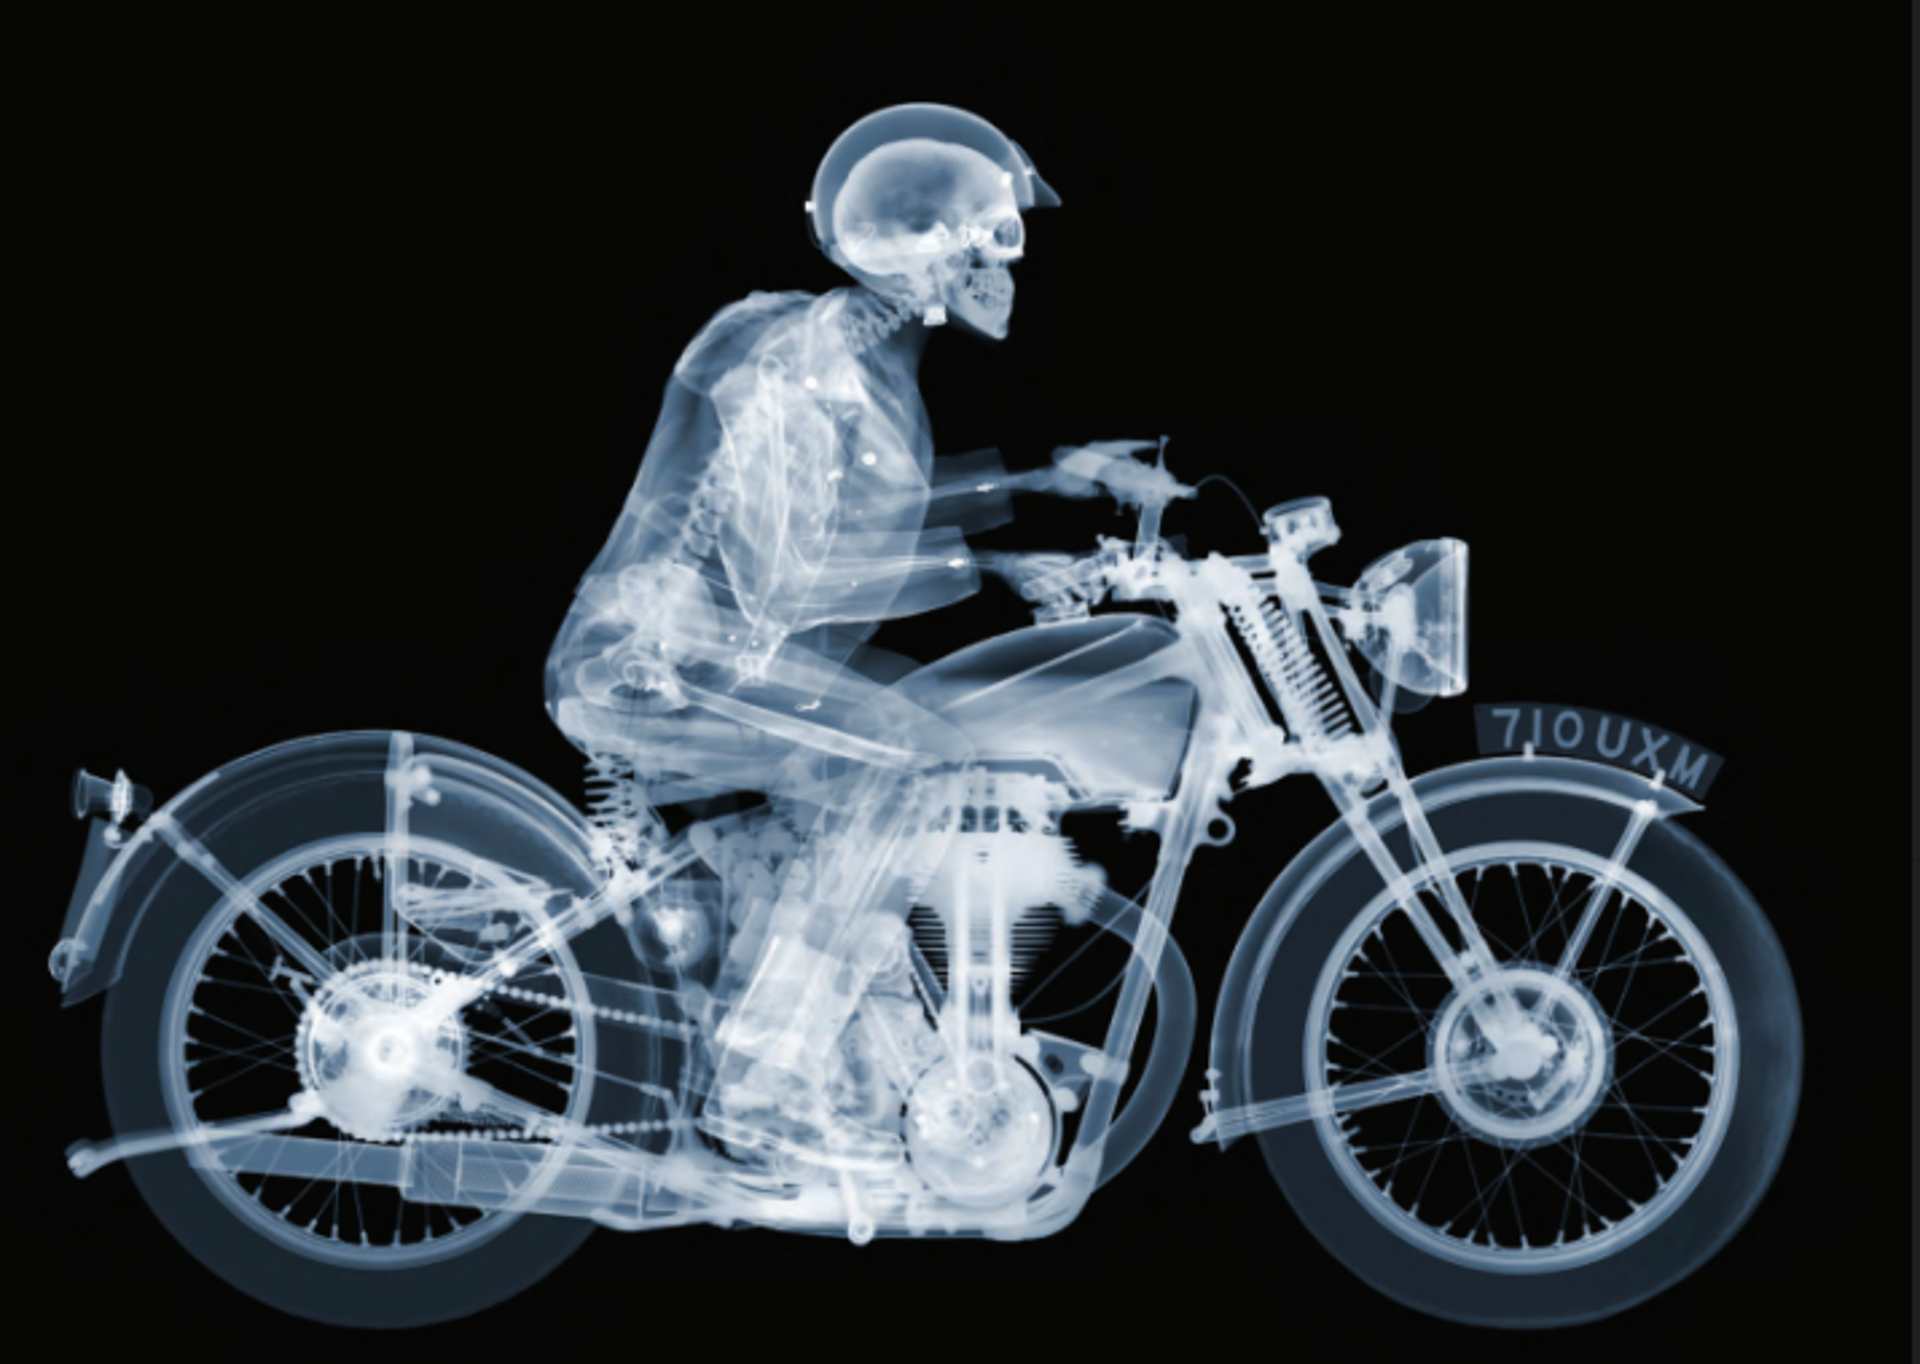 Matchless Rider by Nick Veasey